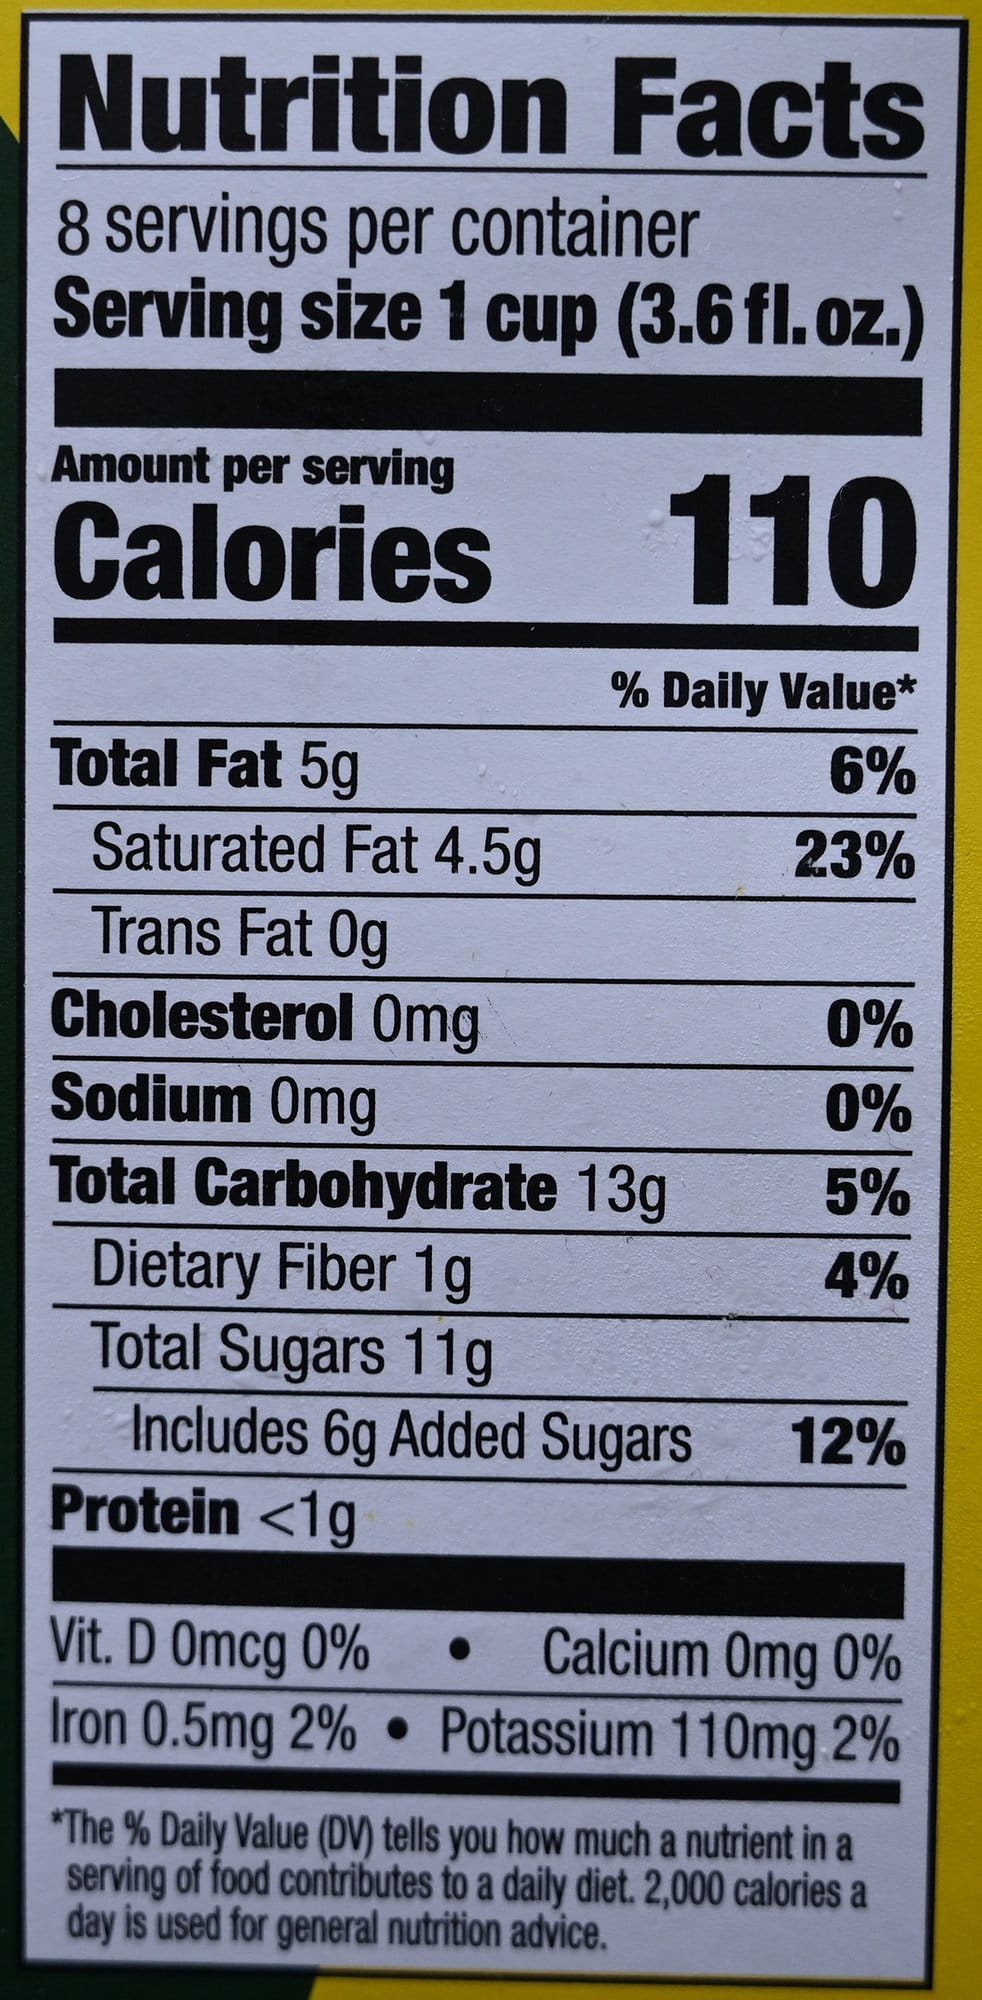 Image of the nutrition facts for the Dole Whip from the back of the box.